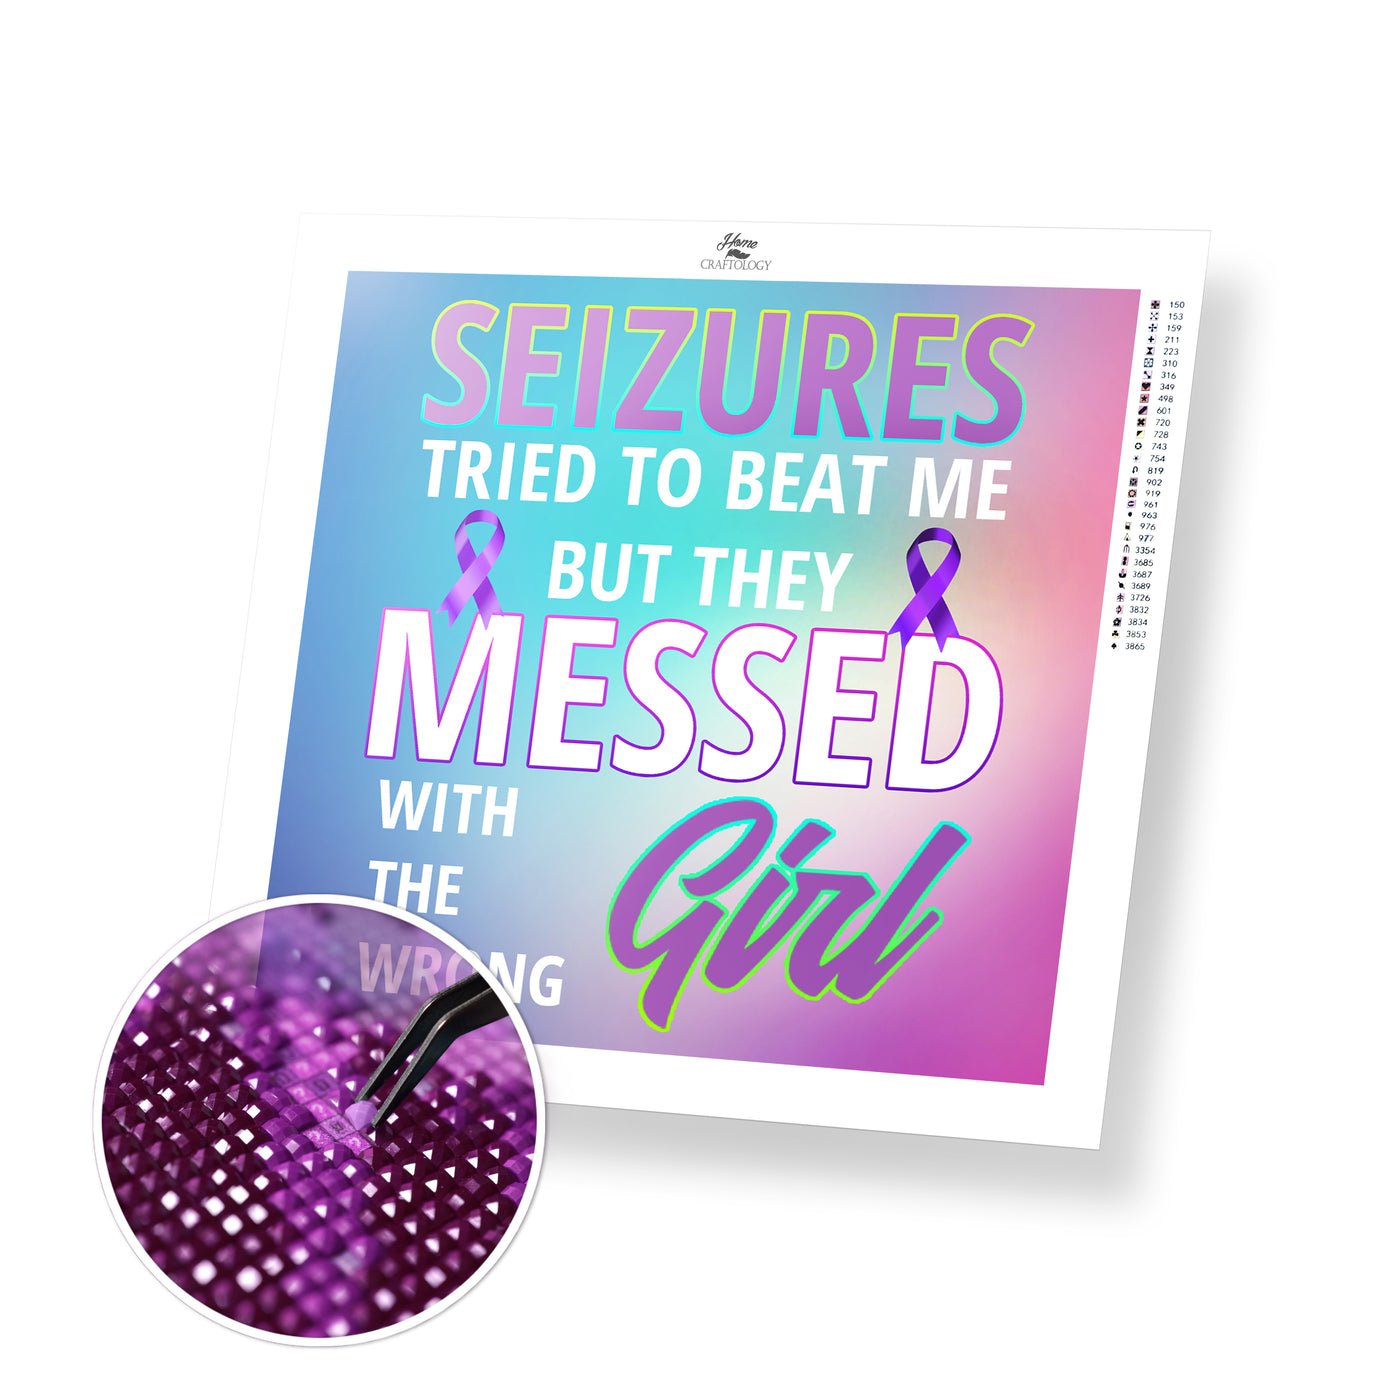 Don't Mess with the Wrong Girl - Premium Diamond Painting Kit